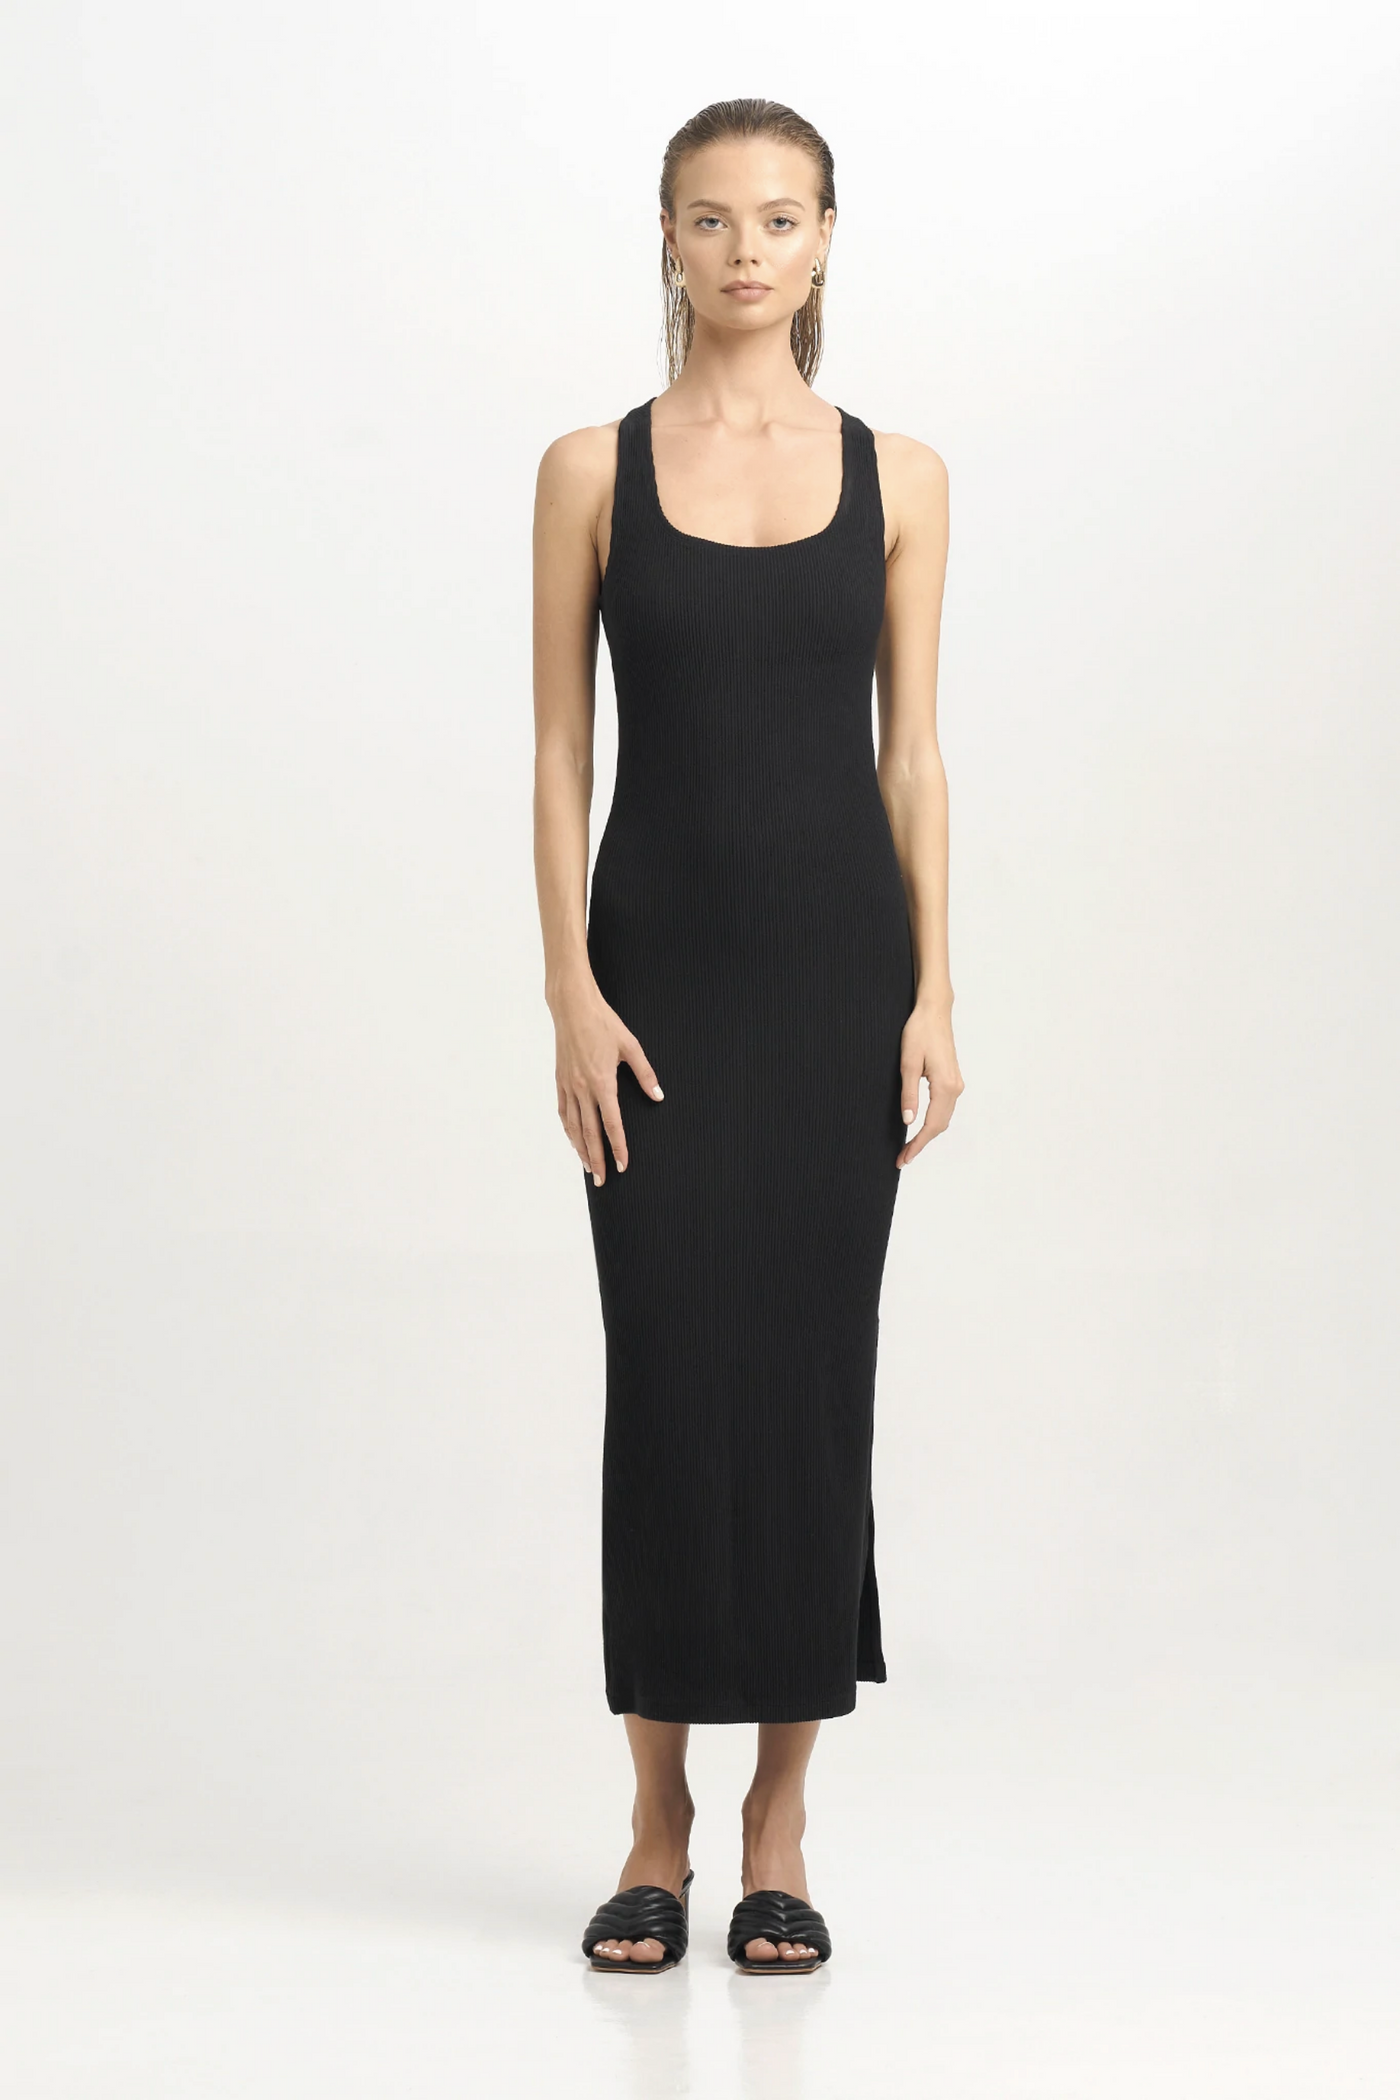 Sans Faff Gibran Cross Back Dress, available on ZERRIN with free Singapore shipping